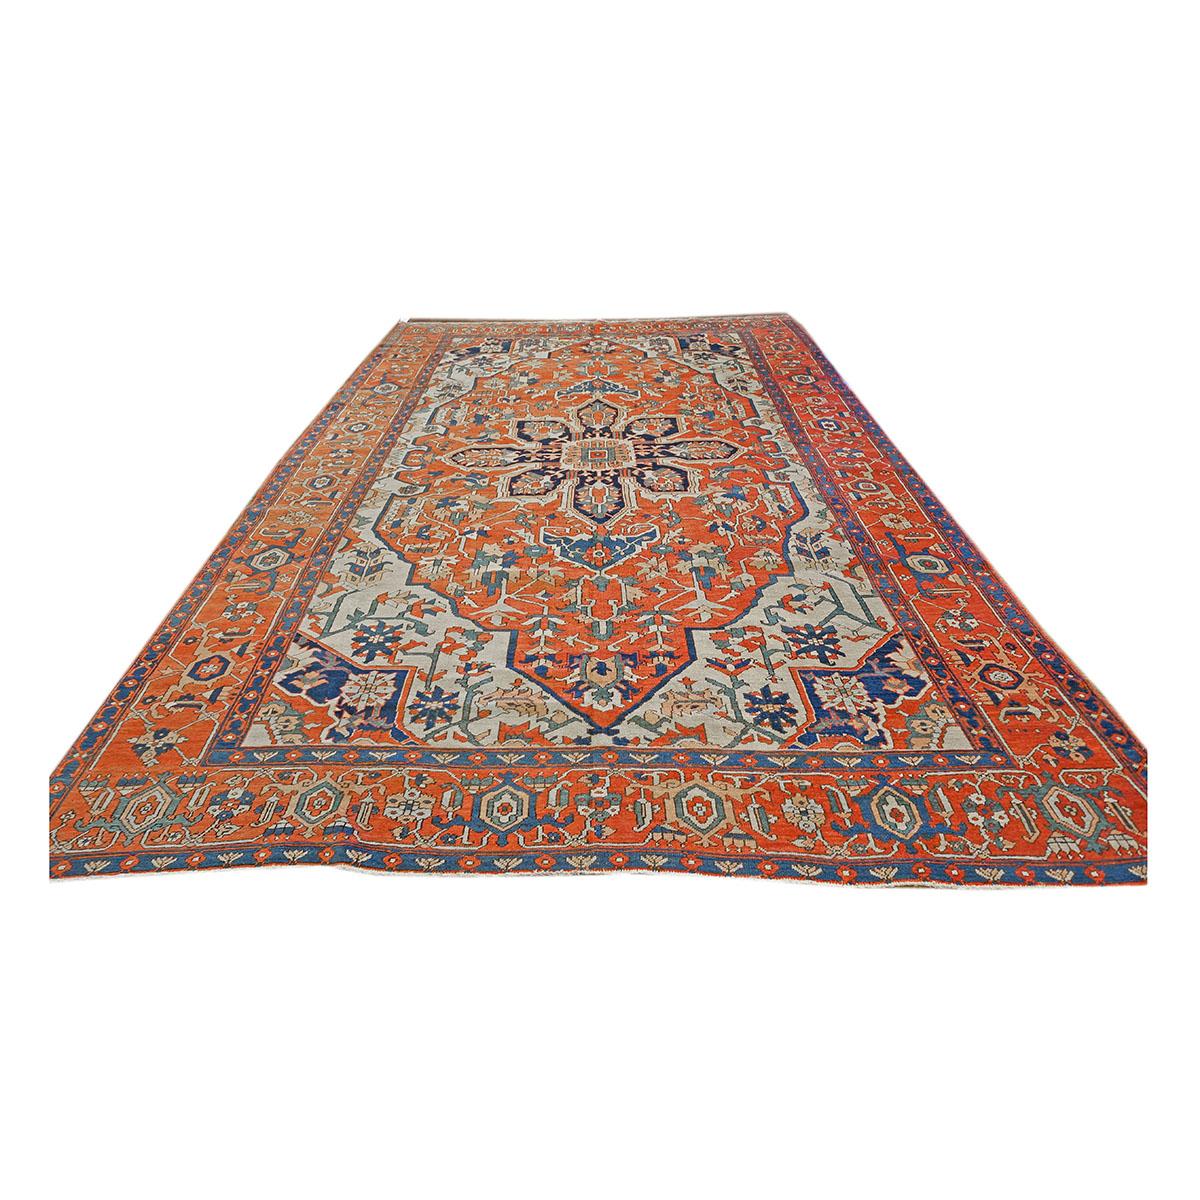 Ashly Fine Rugs presents an original Vintage Persian Serapi room-sized area rug. Persian Serapi rugs are perhaps the most desired rugs by both connoisseurs and interior designers. Made with all vegetable-dyed, handspun wool and entirely handwoven.